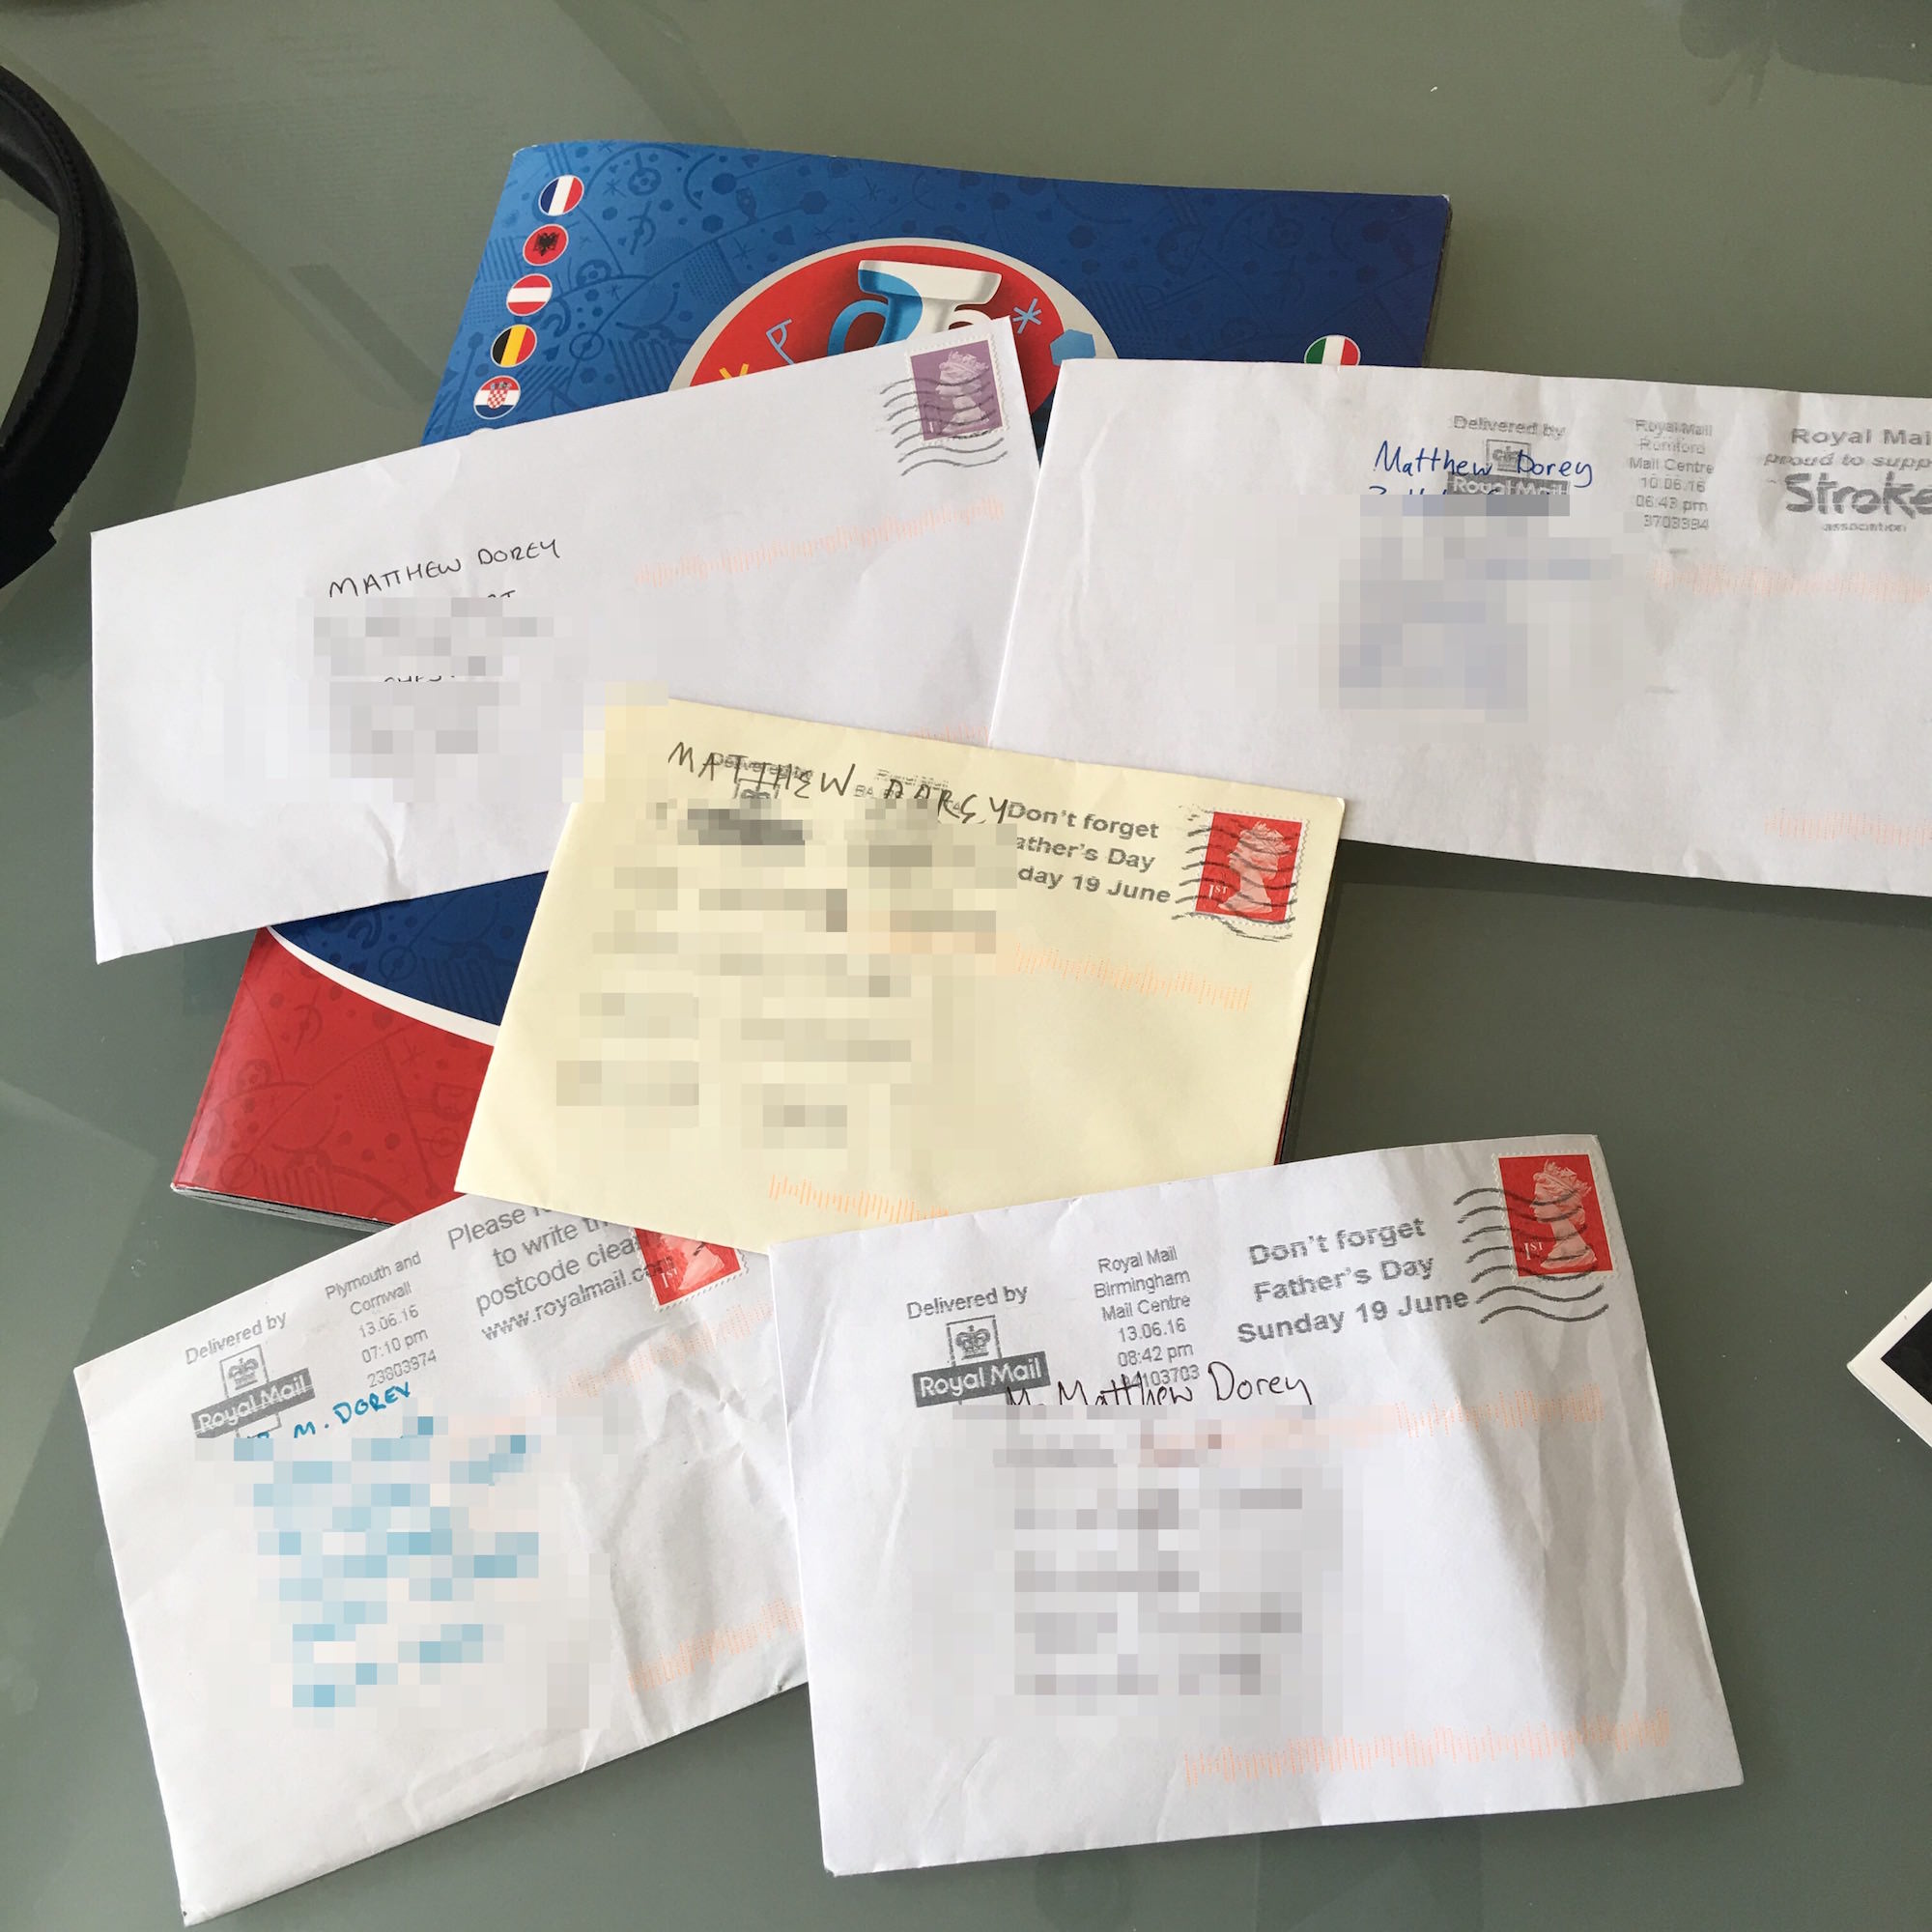 Envelopes containing swaps that have arrived in the post in recent days.